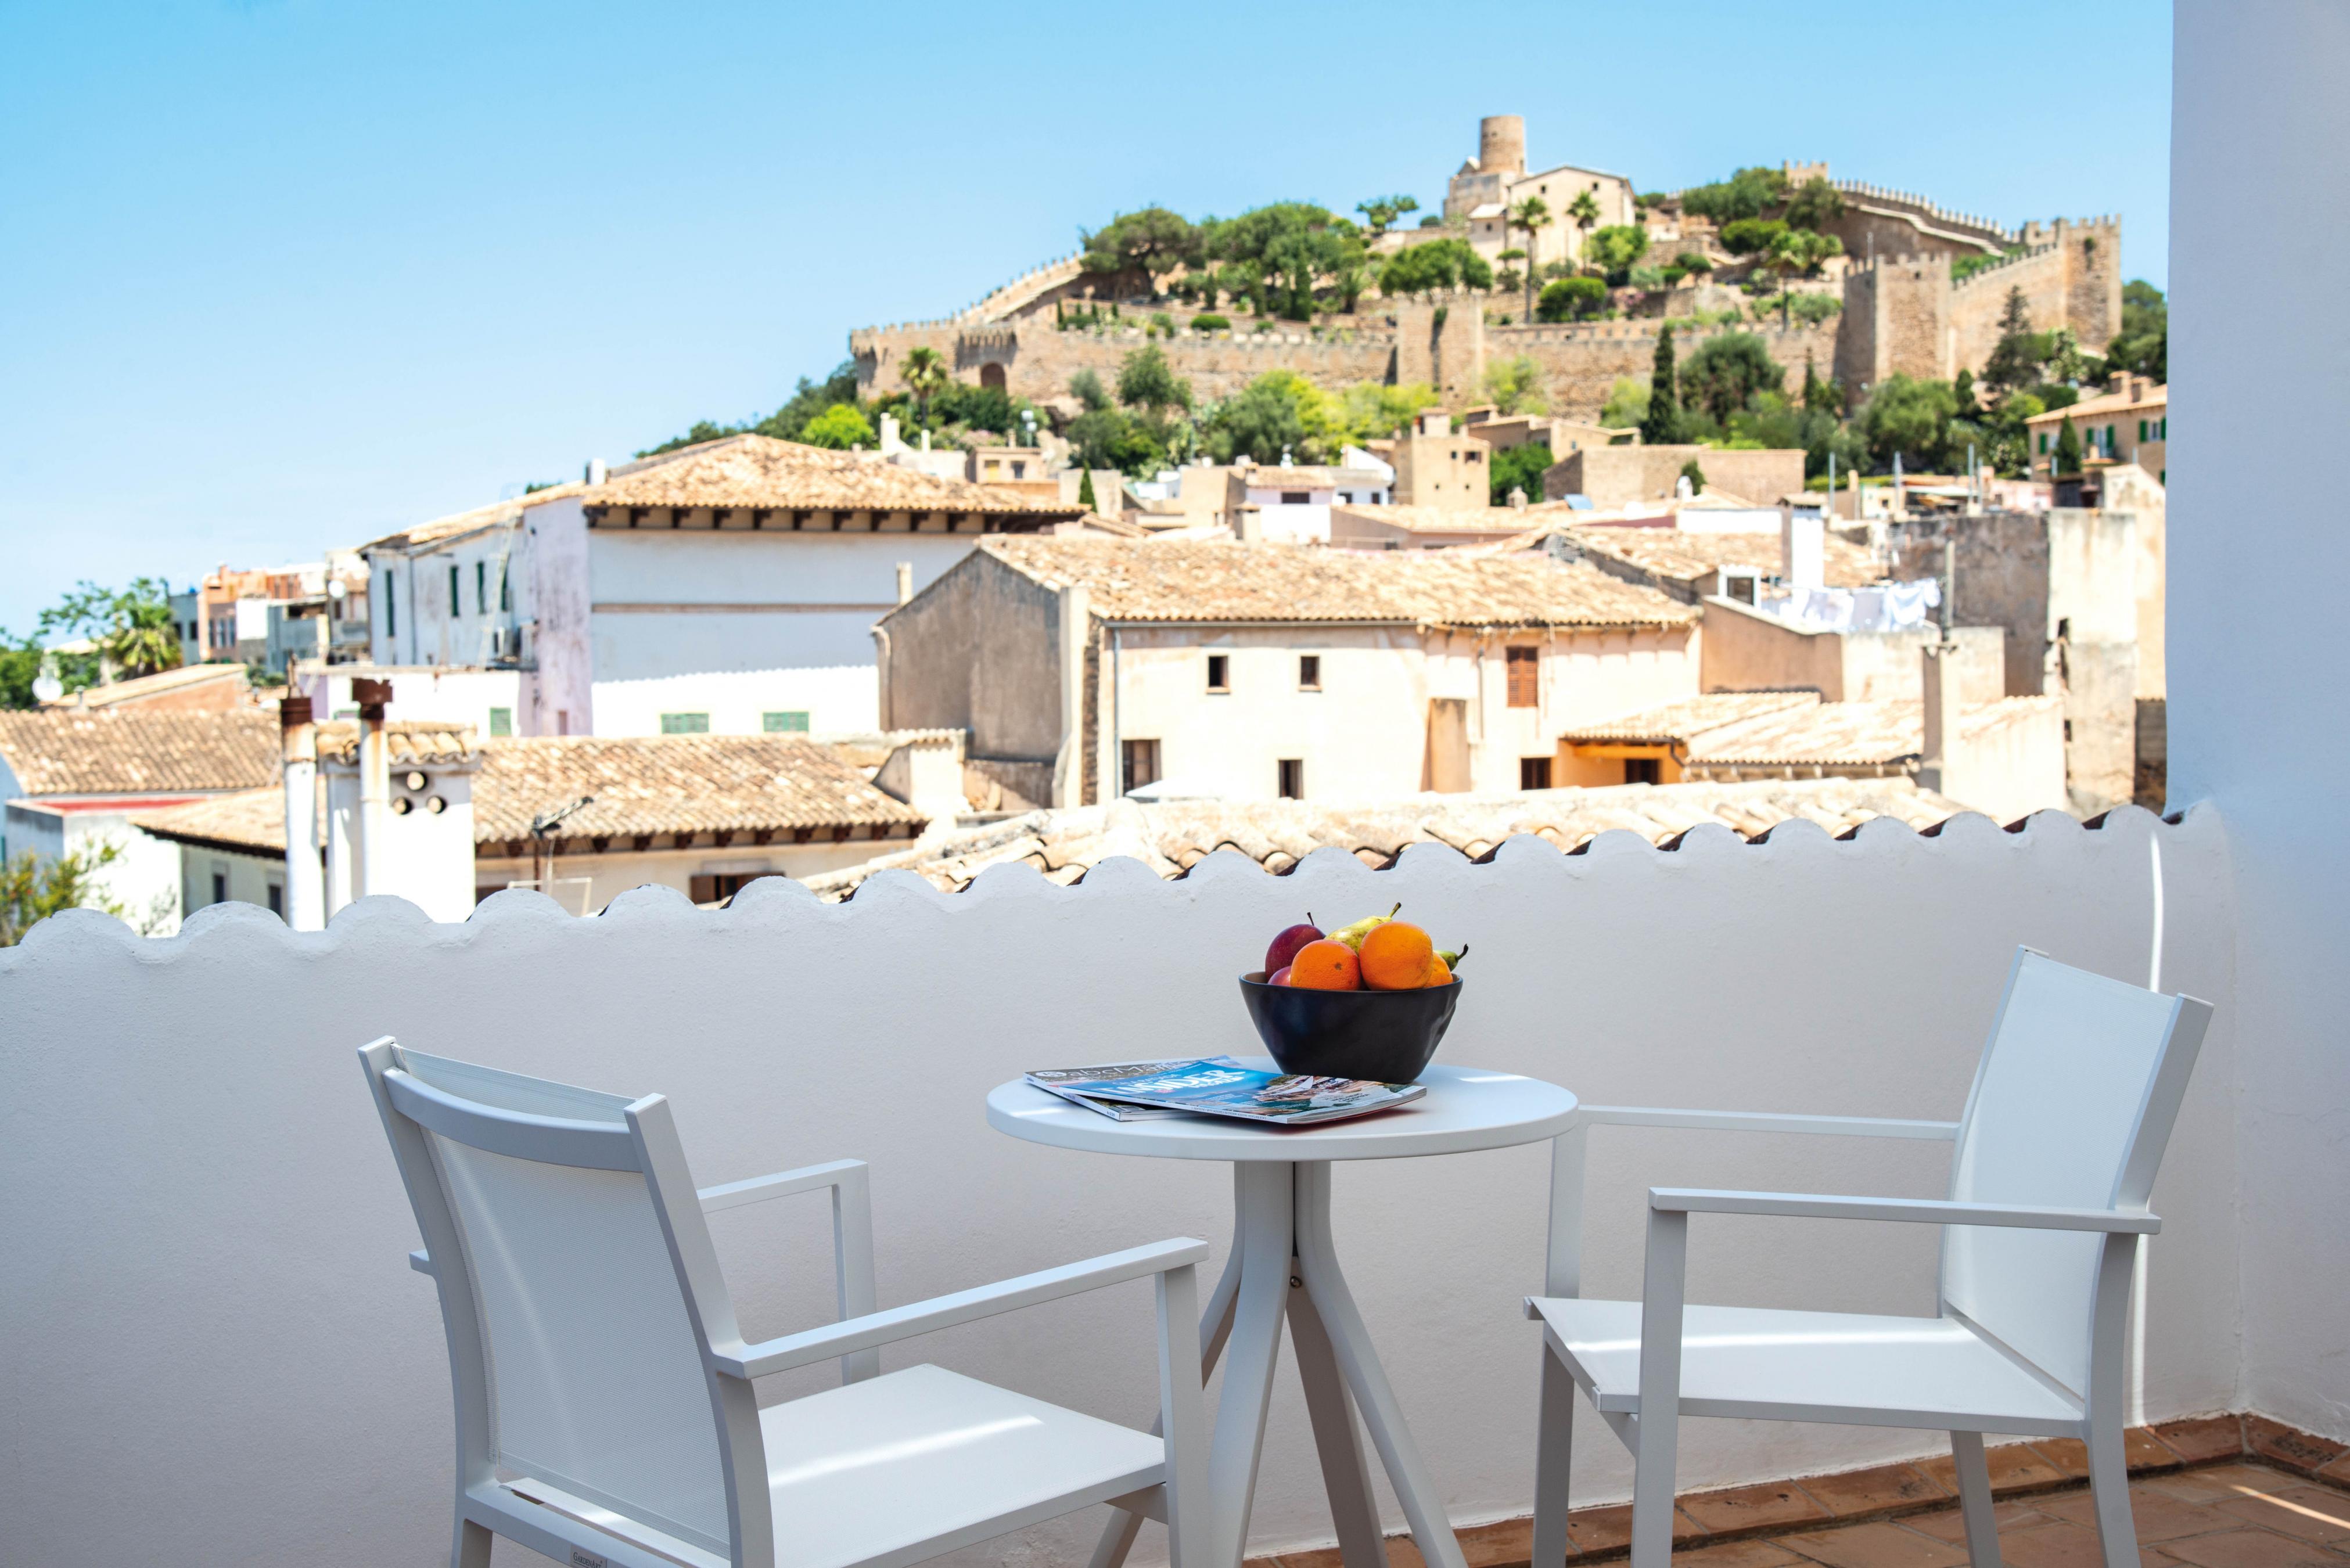 Property Image 2 - CAN SEROL 2 - Nice apartment with a wonderful terrace and views of the medieval castle. Free WiFi